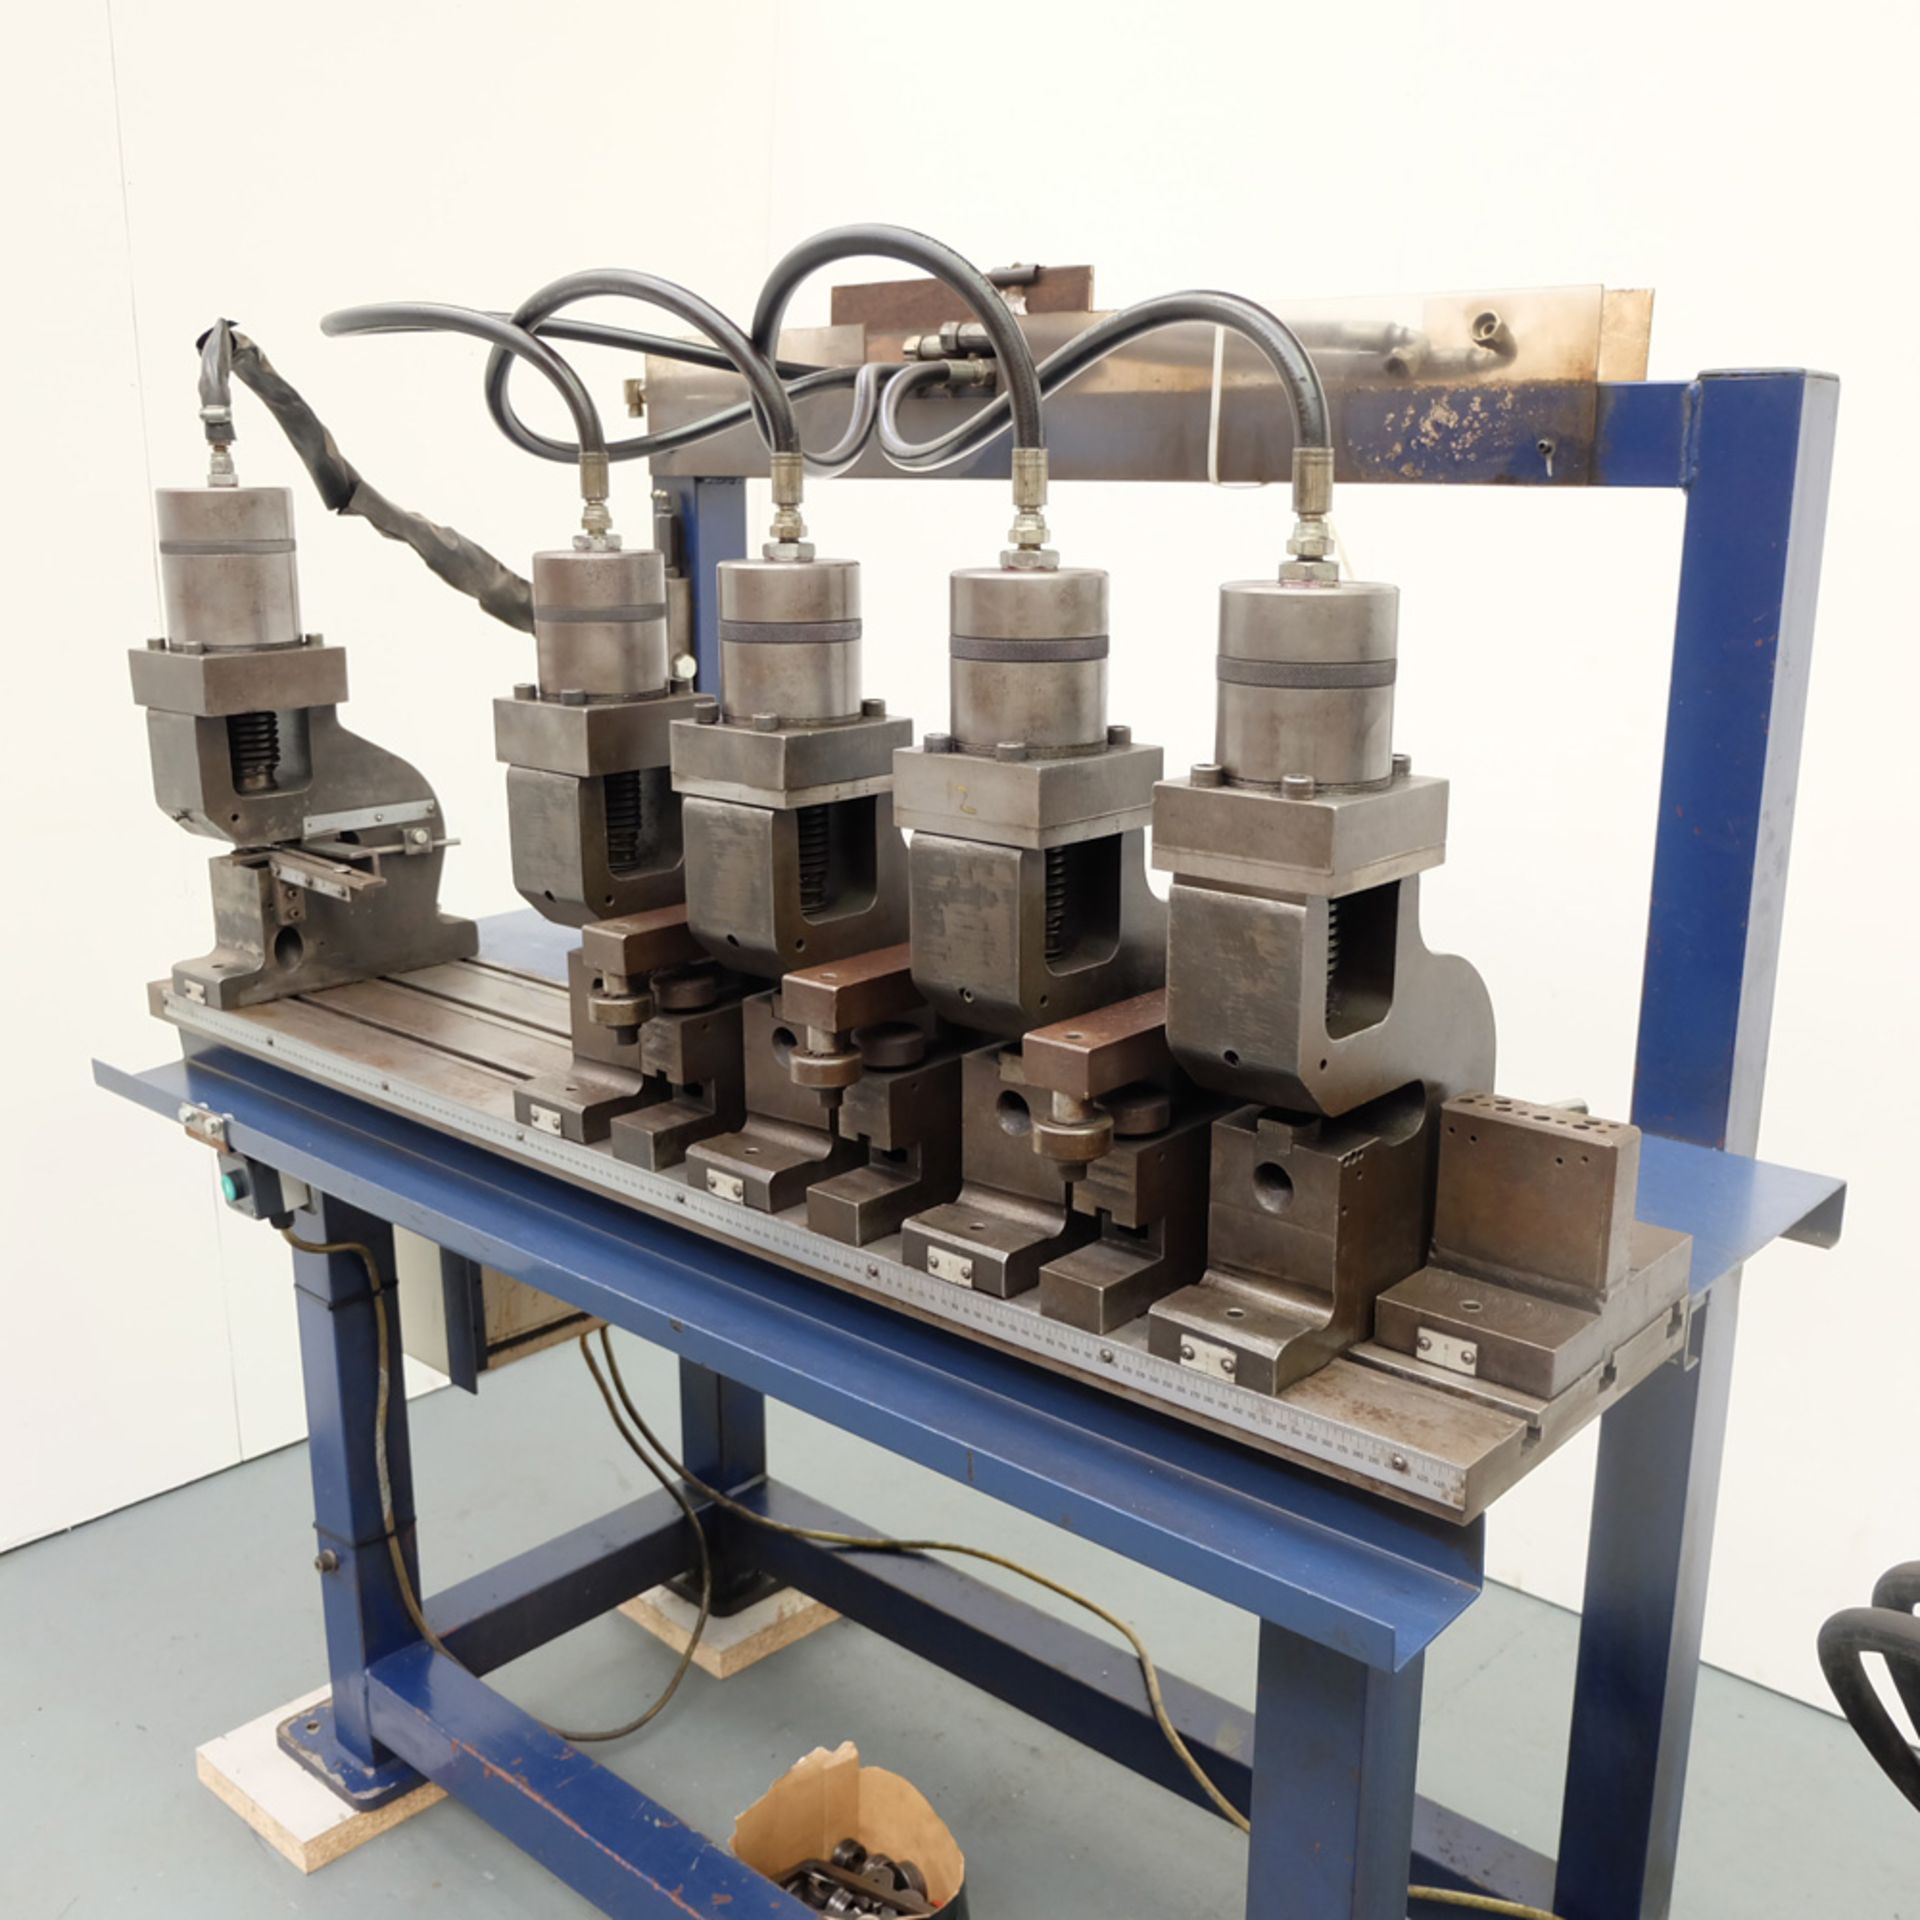 Hydraulic Powered 5 Head Punching Station. On Tee Slotted Table. - Image 2 of 13